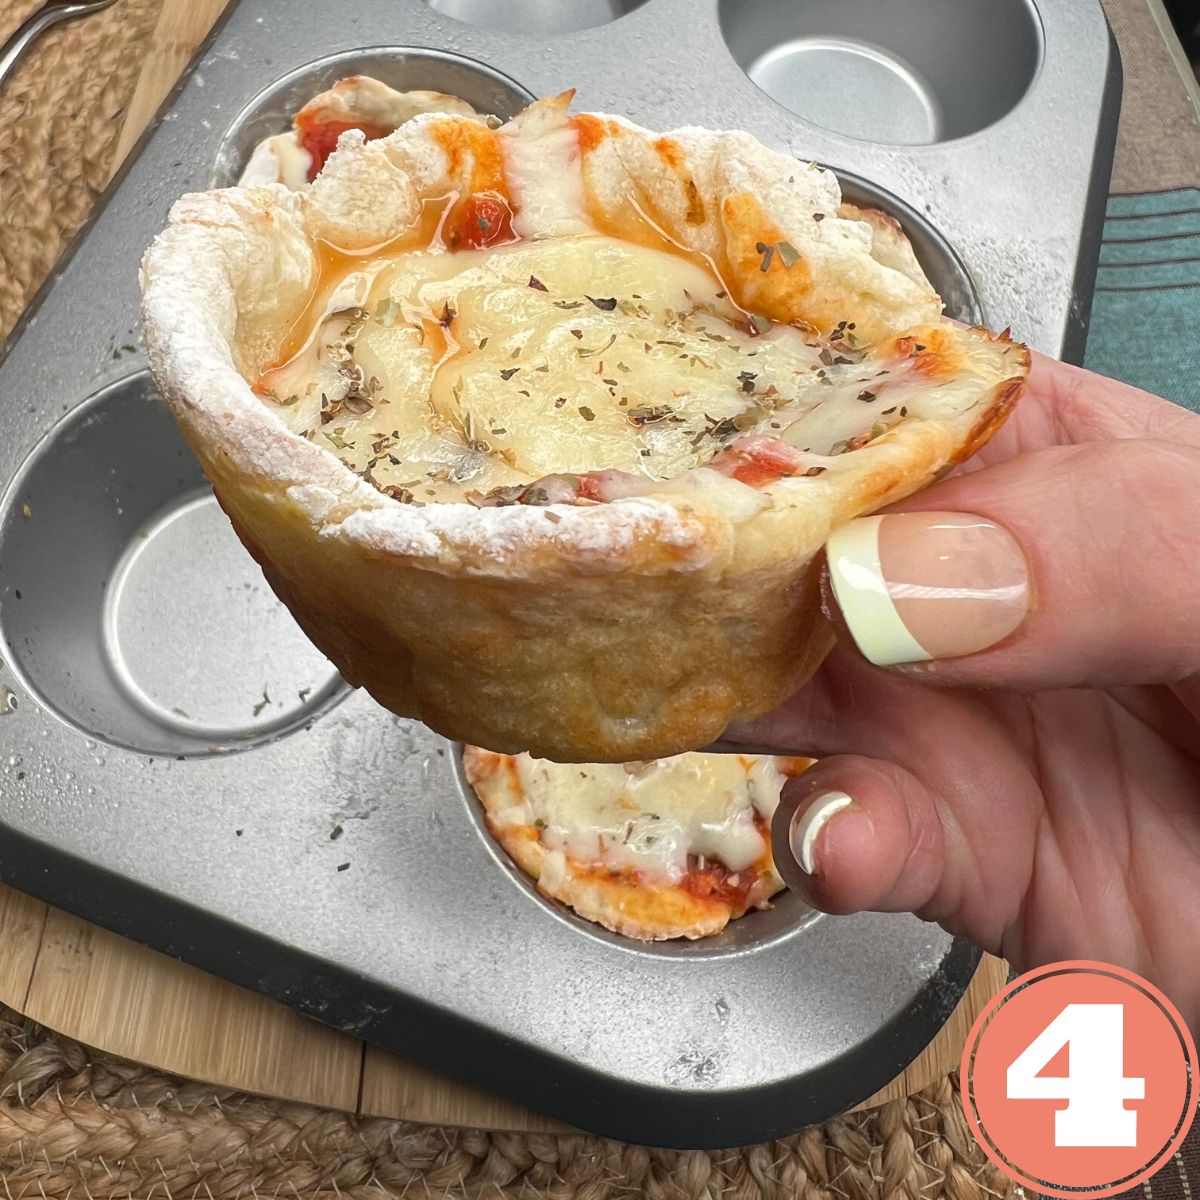 One individual deep dish pizza being held in a hand over a muffin tin